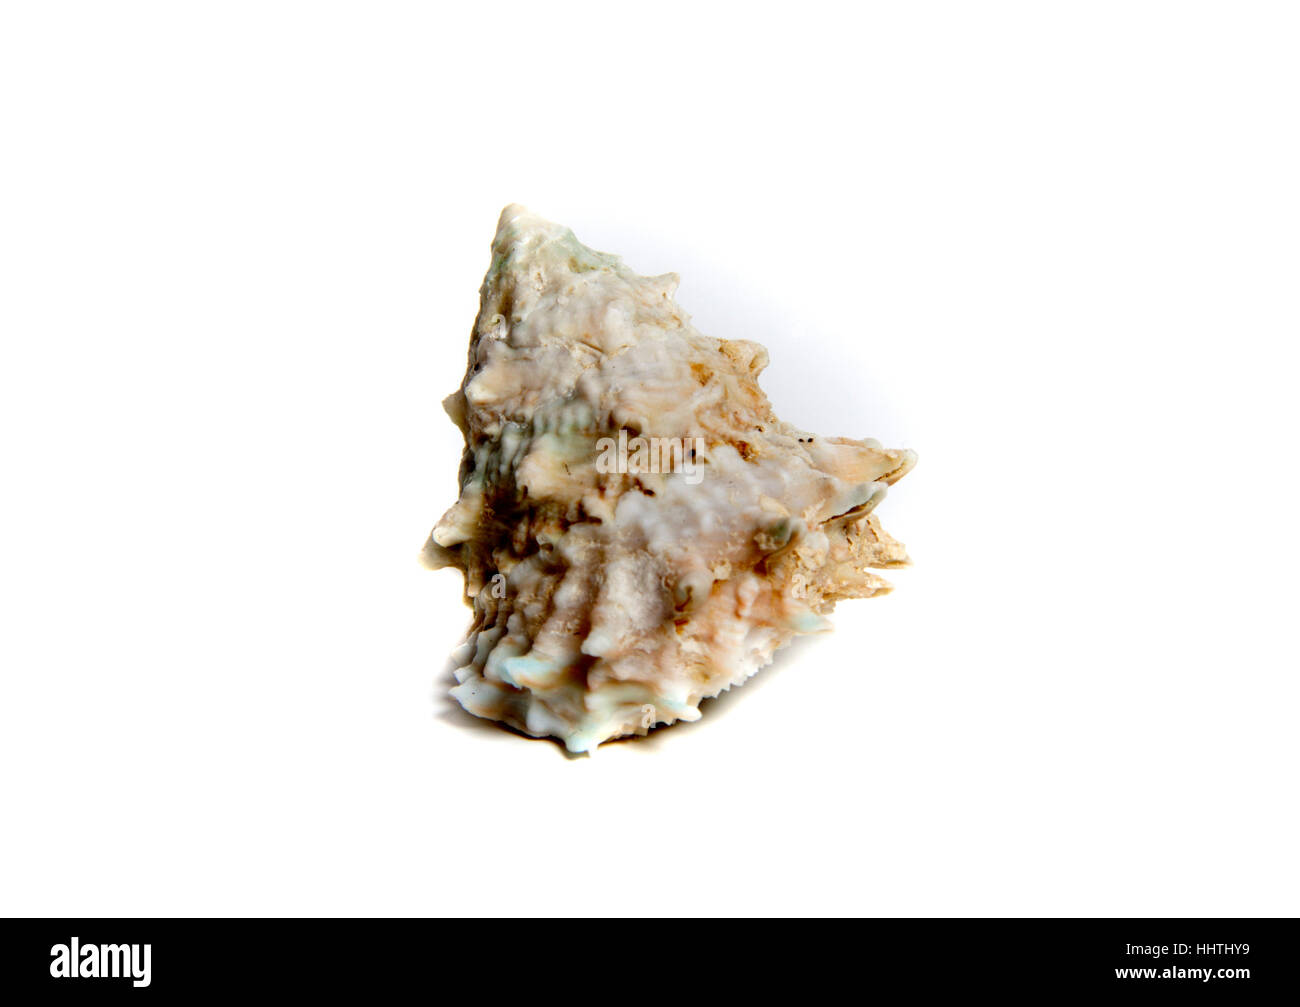 Marine sea shell in a studio setting against a white background Stock Photo